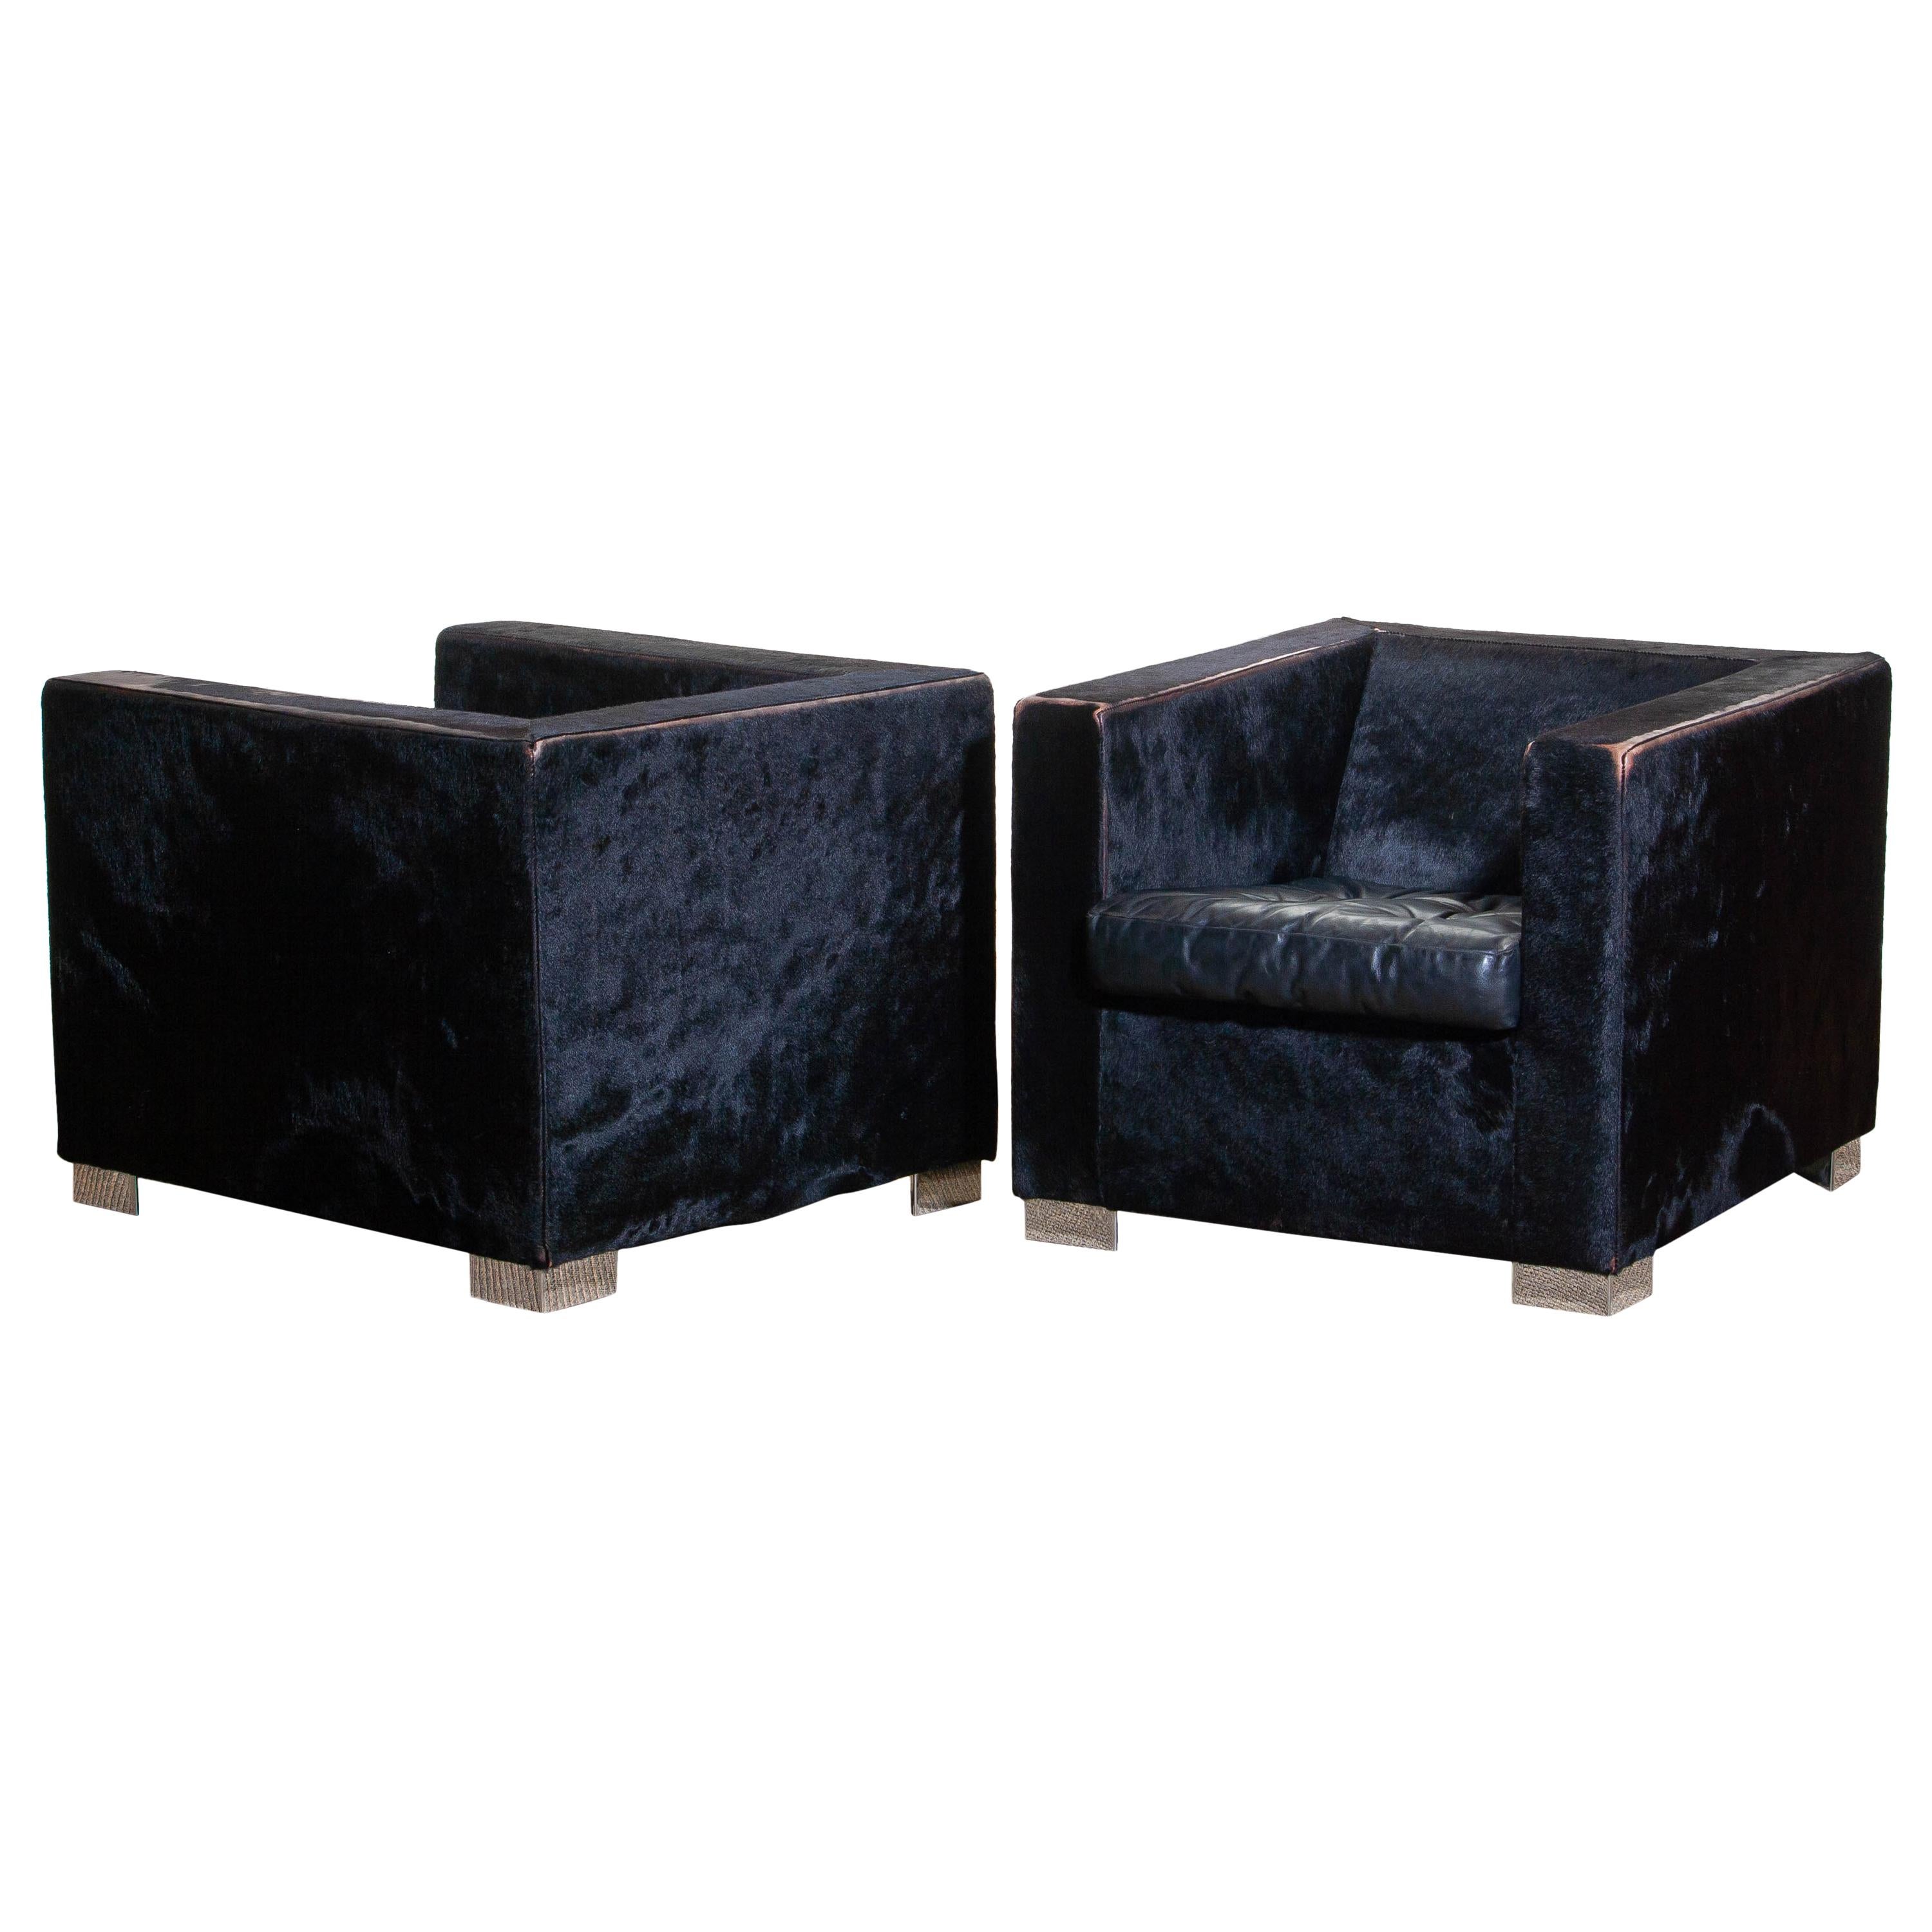 1990s Pair of Black Rodolfo Dordoni for Minotti Club Chairs in Pony and Leather In Good Condition In Silvolde, Gelderland